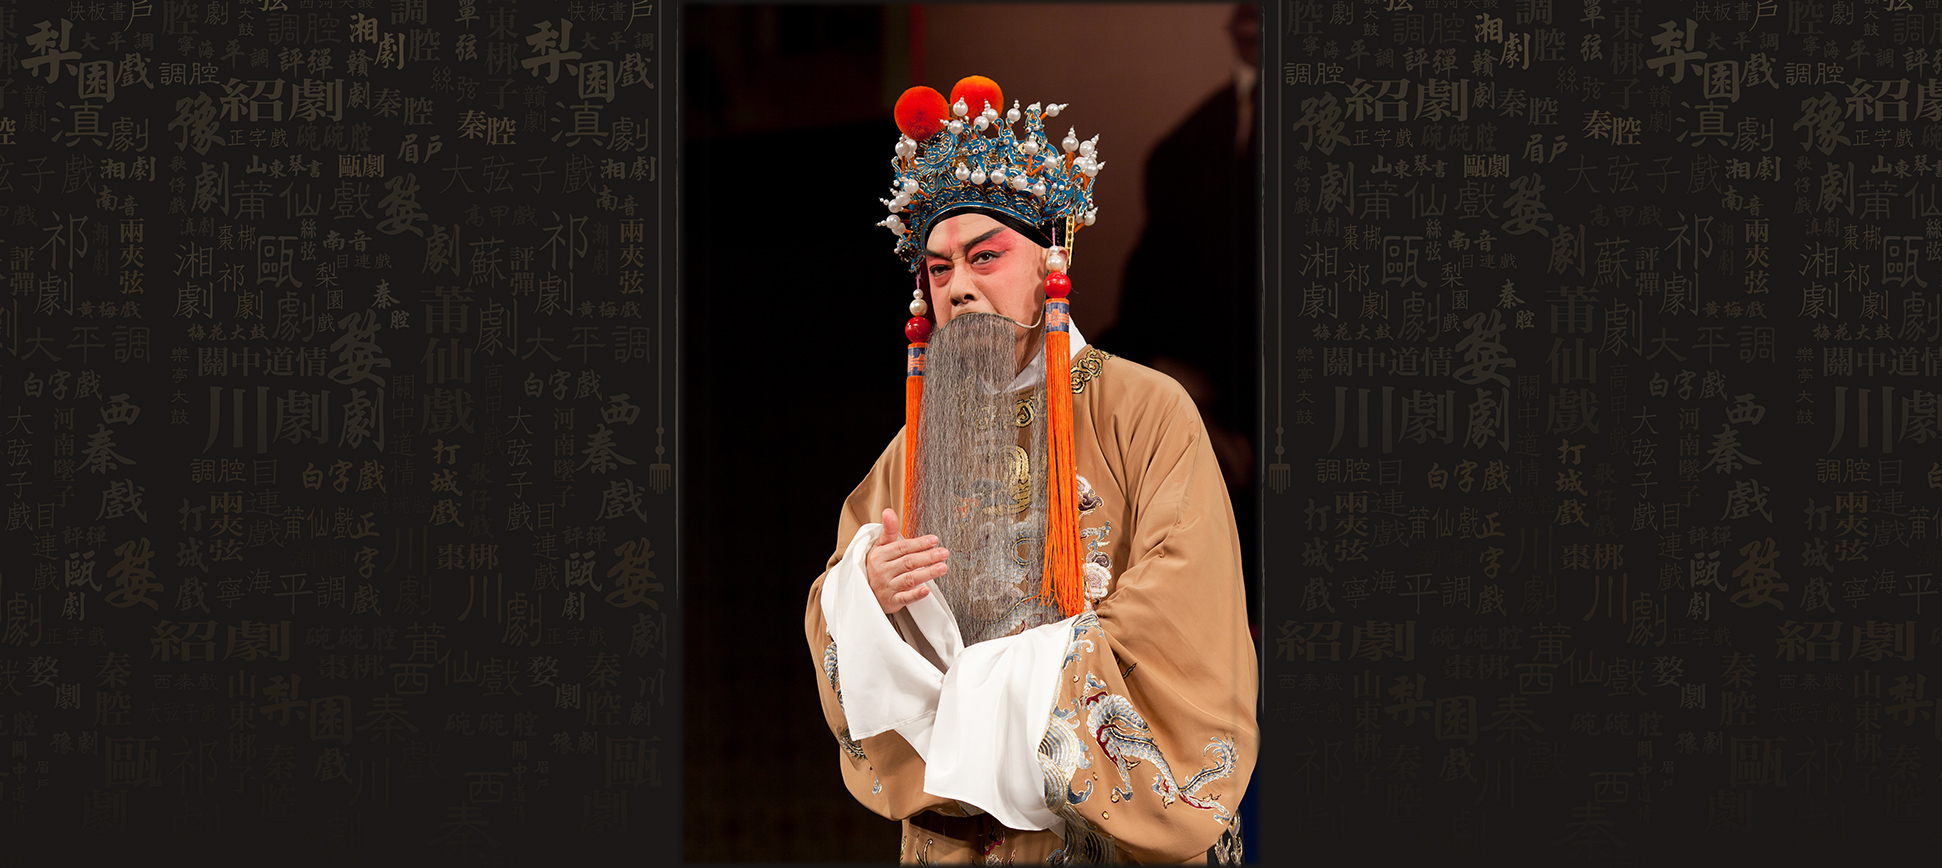 The Fragrance of Chrysanthemums and Orchids - A Close Encounter of Peking Opera and Kunqu Opera